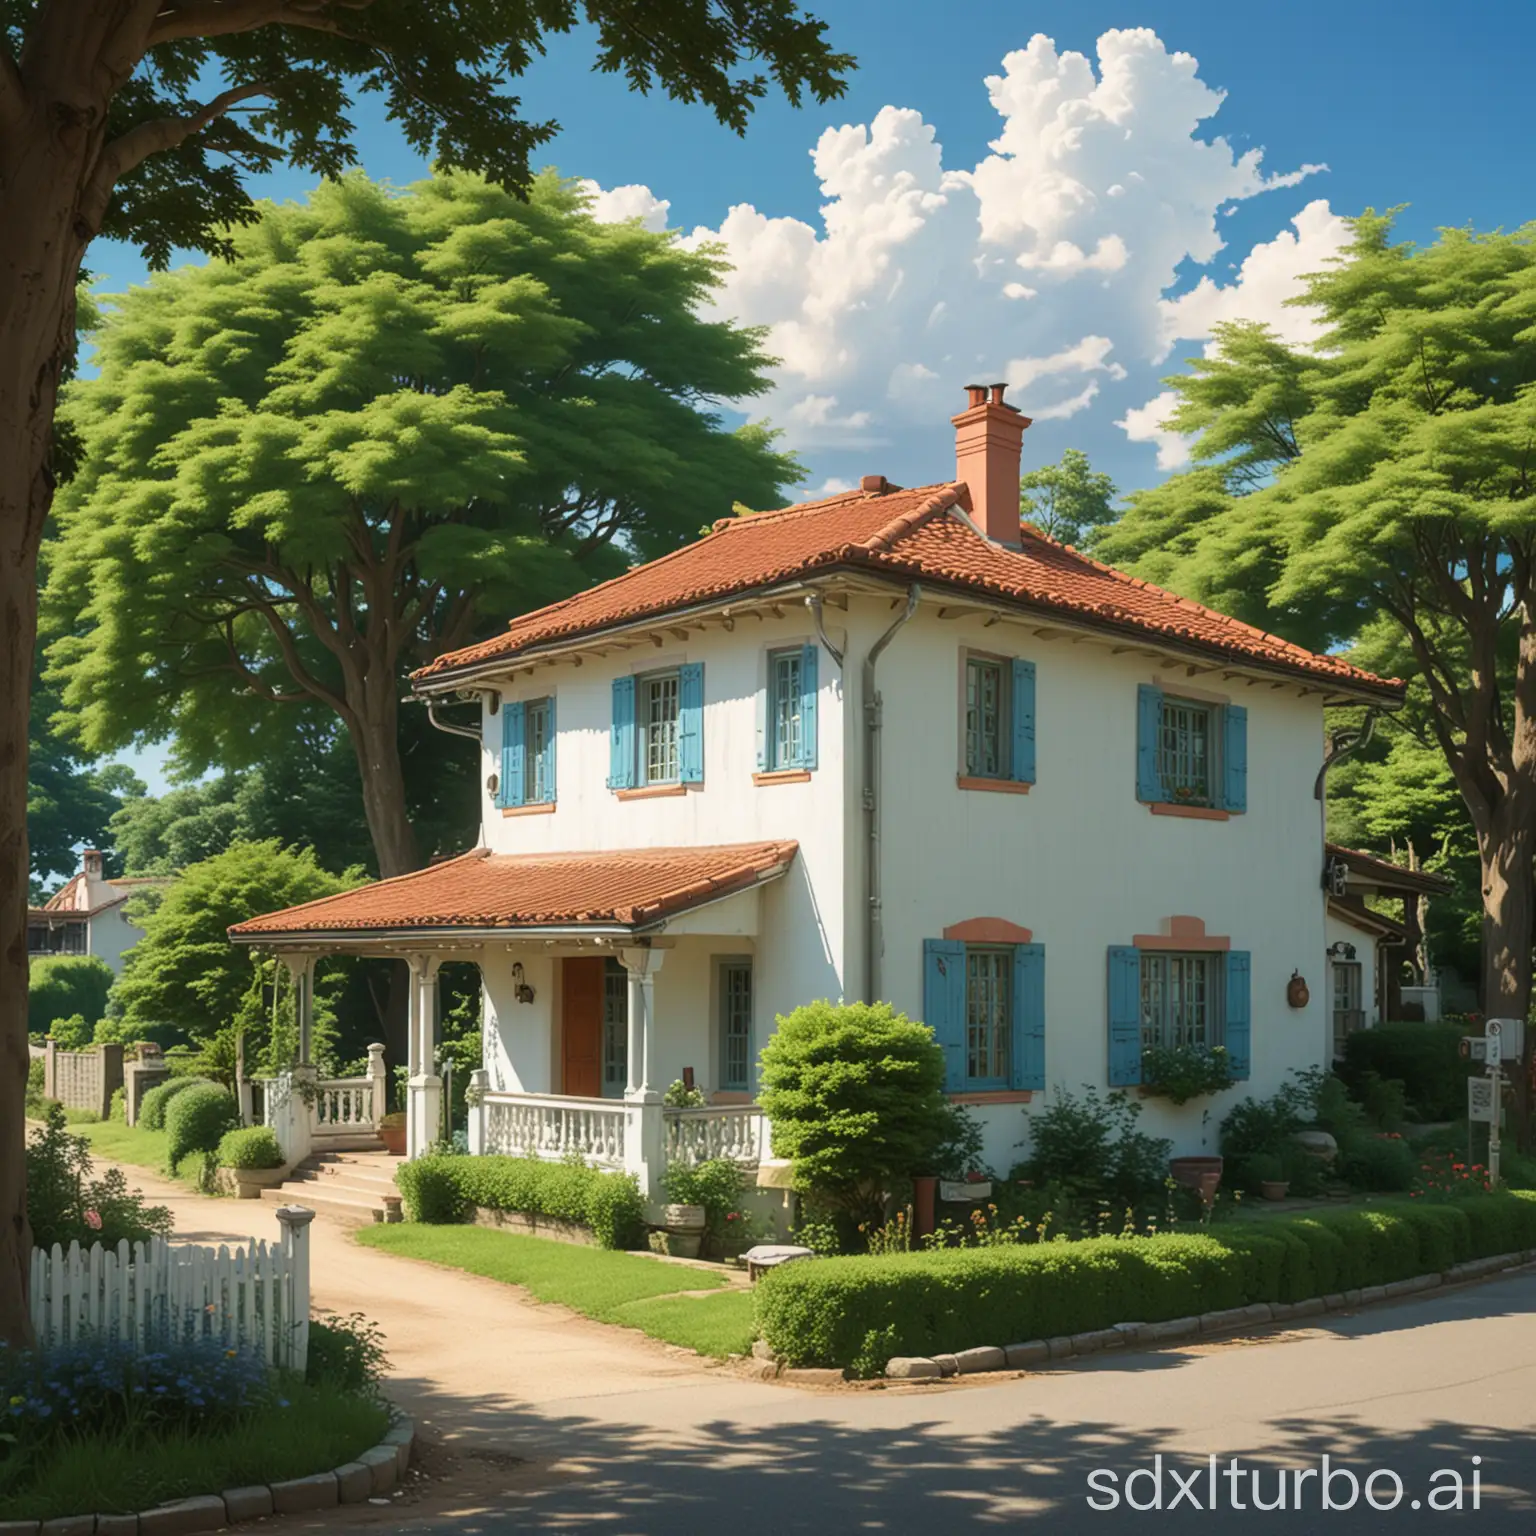 Studio Ghibli anime of  a tranquil rural setting. It features a charming two-story house with a white exterior and terracotta roof tiles. The house is adorned with green shutters on its multiple windows, some of which are open, and has a welcoming wooden door.  In the foreground, there's a classic mid-20th century car, painted blue with chrome detailing, parked on a dirt road or driveway leading to the house. The surrounding area is rich with greenery, including large trees that provide ample shade, one prominently on the left side of the frame. The lush foliage suggests it's either late spring or summer.  The scene is set against a clear blue sky with a few scattered clouds, indicating a bright and sunny day. Detailed,vivid